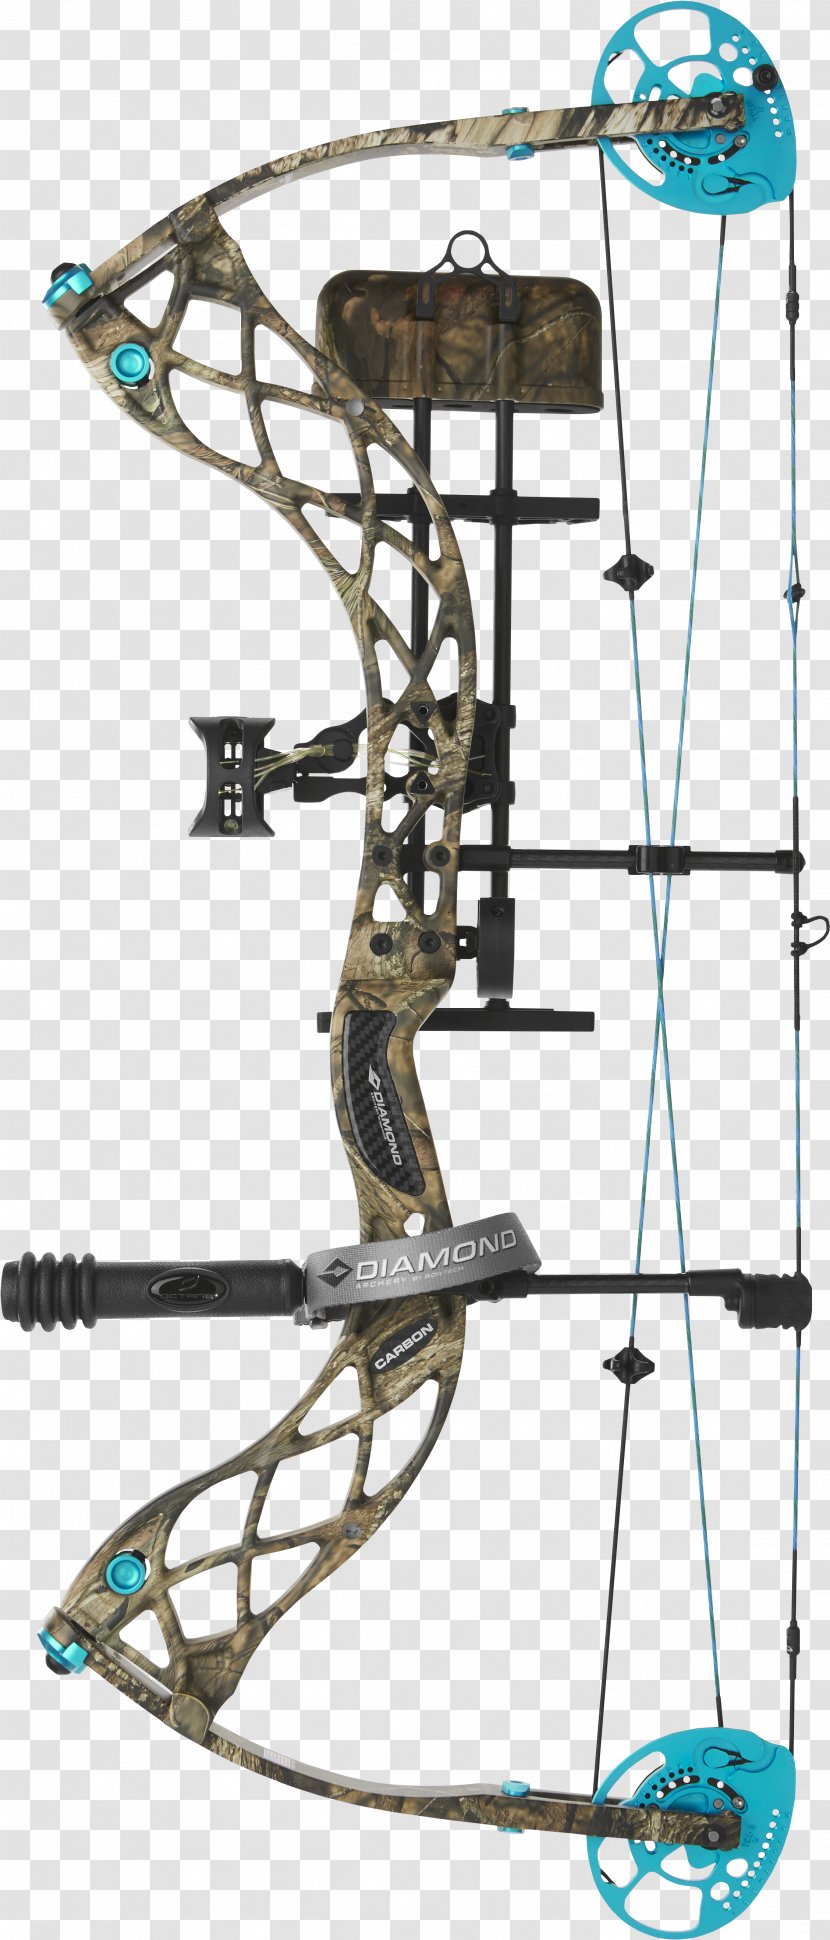 Compound Bows Archery Bow And Arrow Hunting Carbon - Puppies Transparent PNG